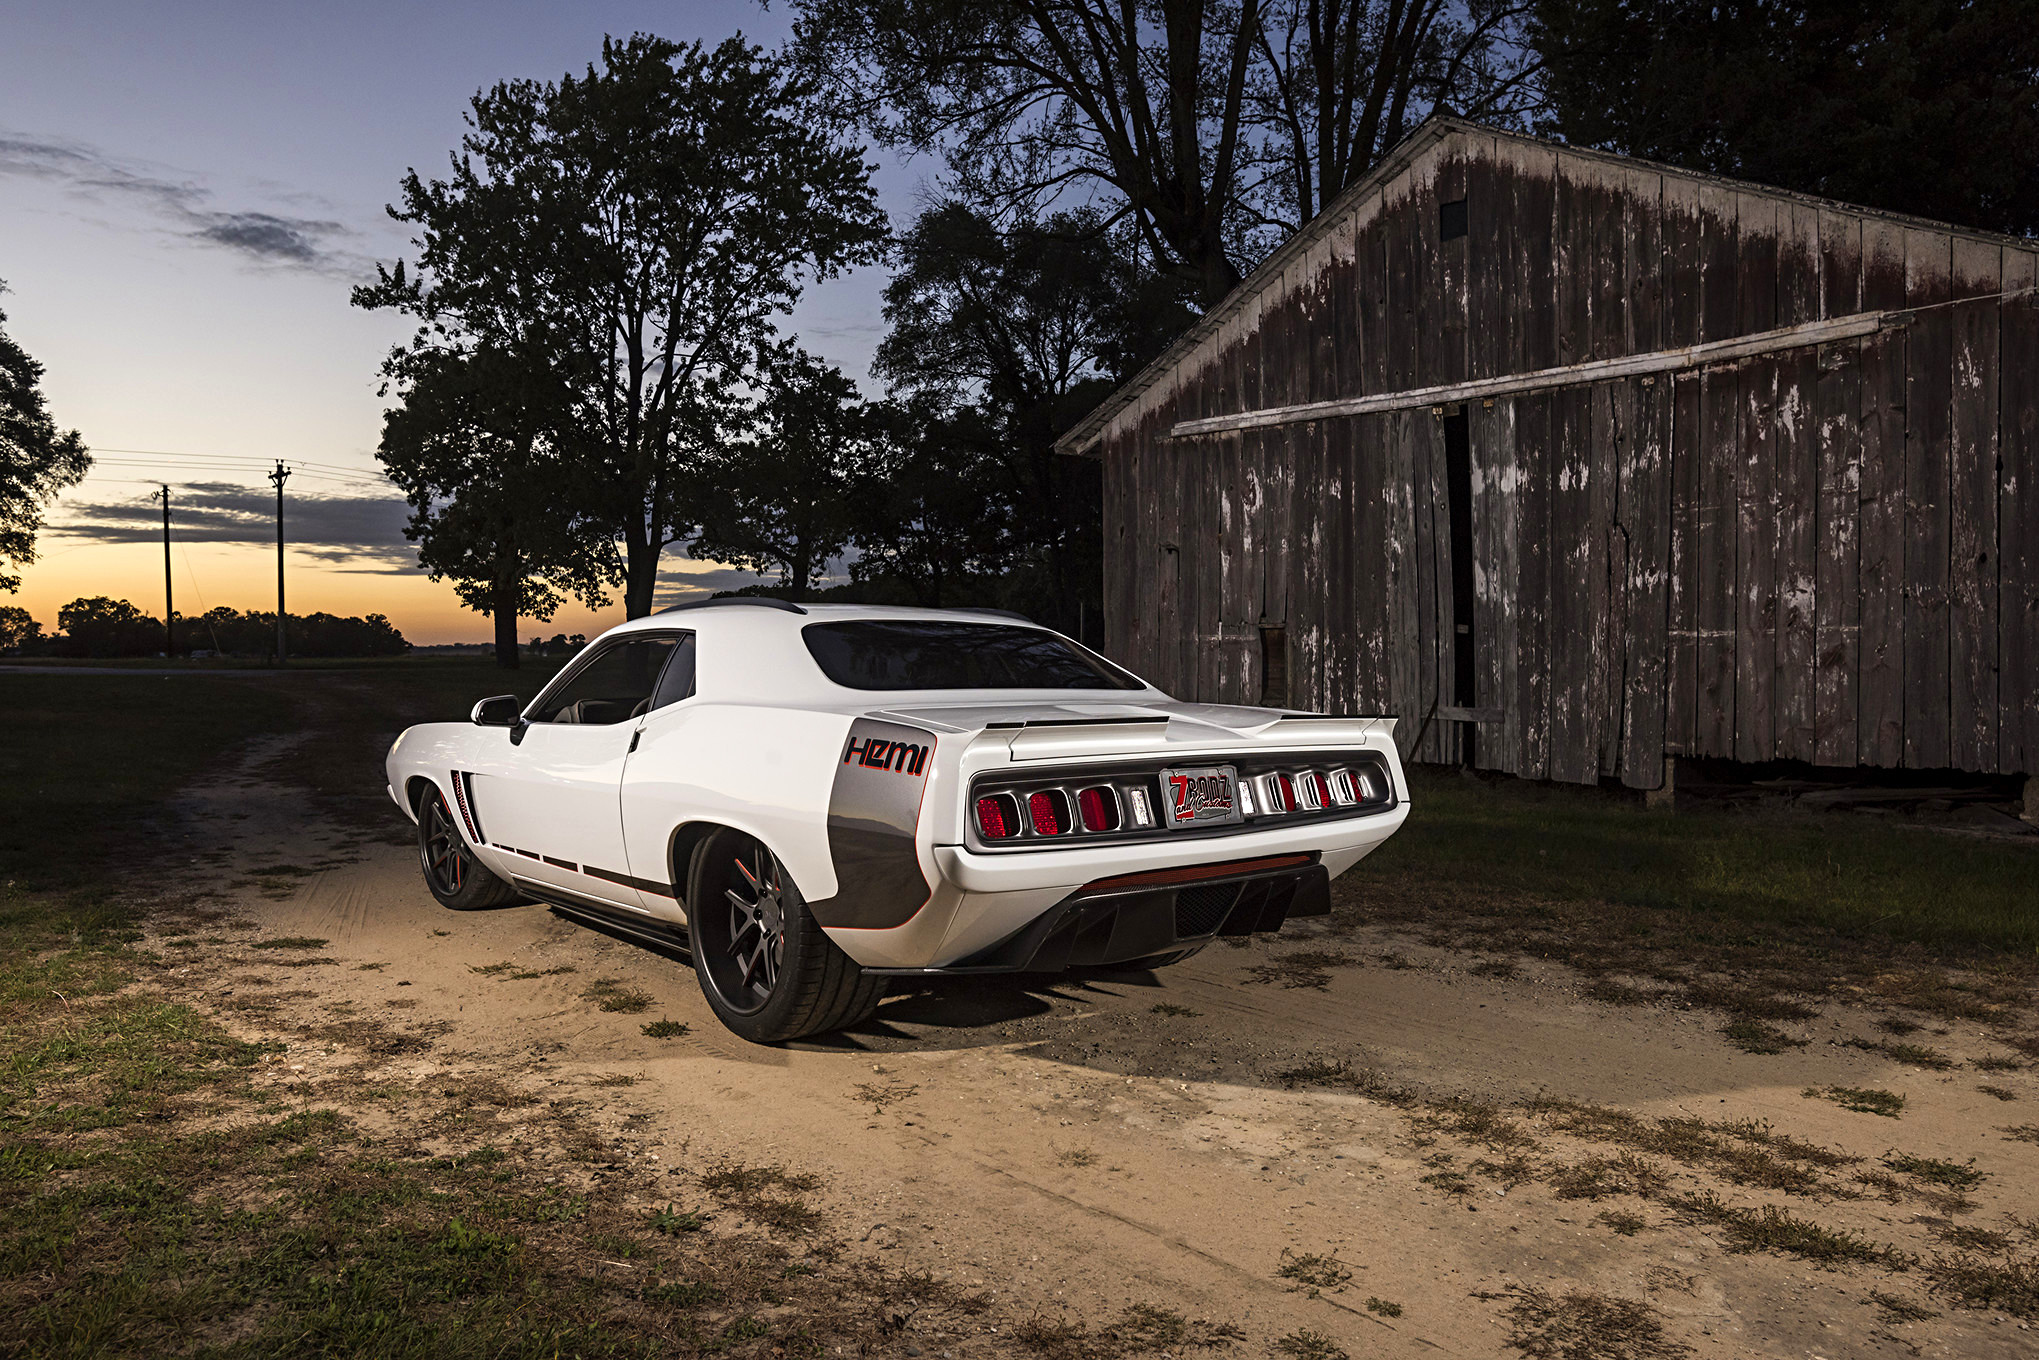 Plymouth Barracuda Picture